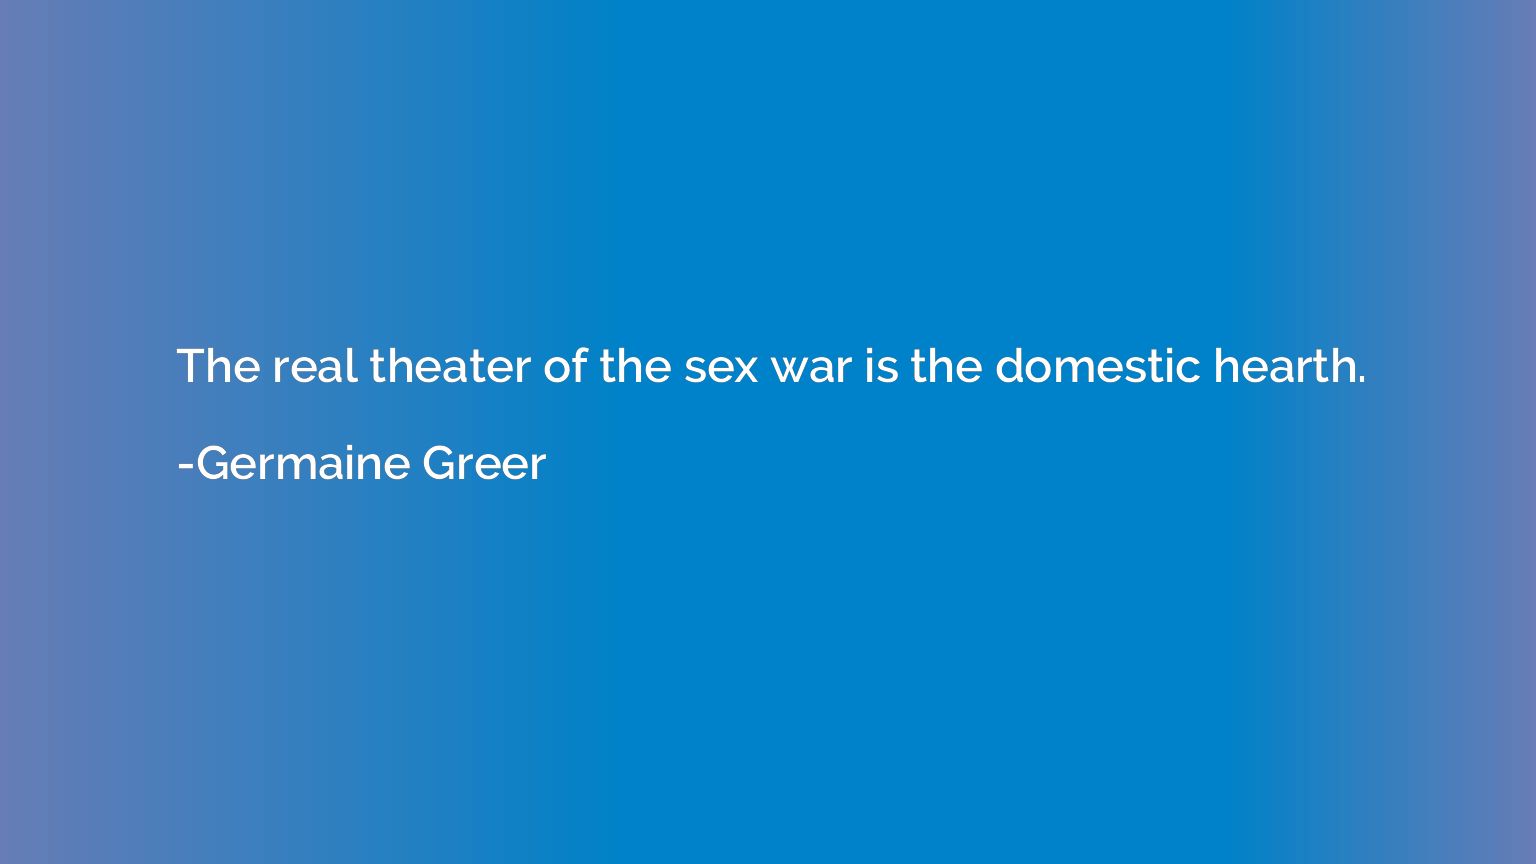 The real theater of the sex war is the domestic hearth.